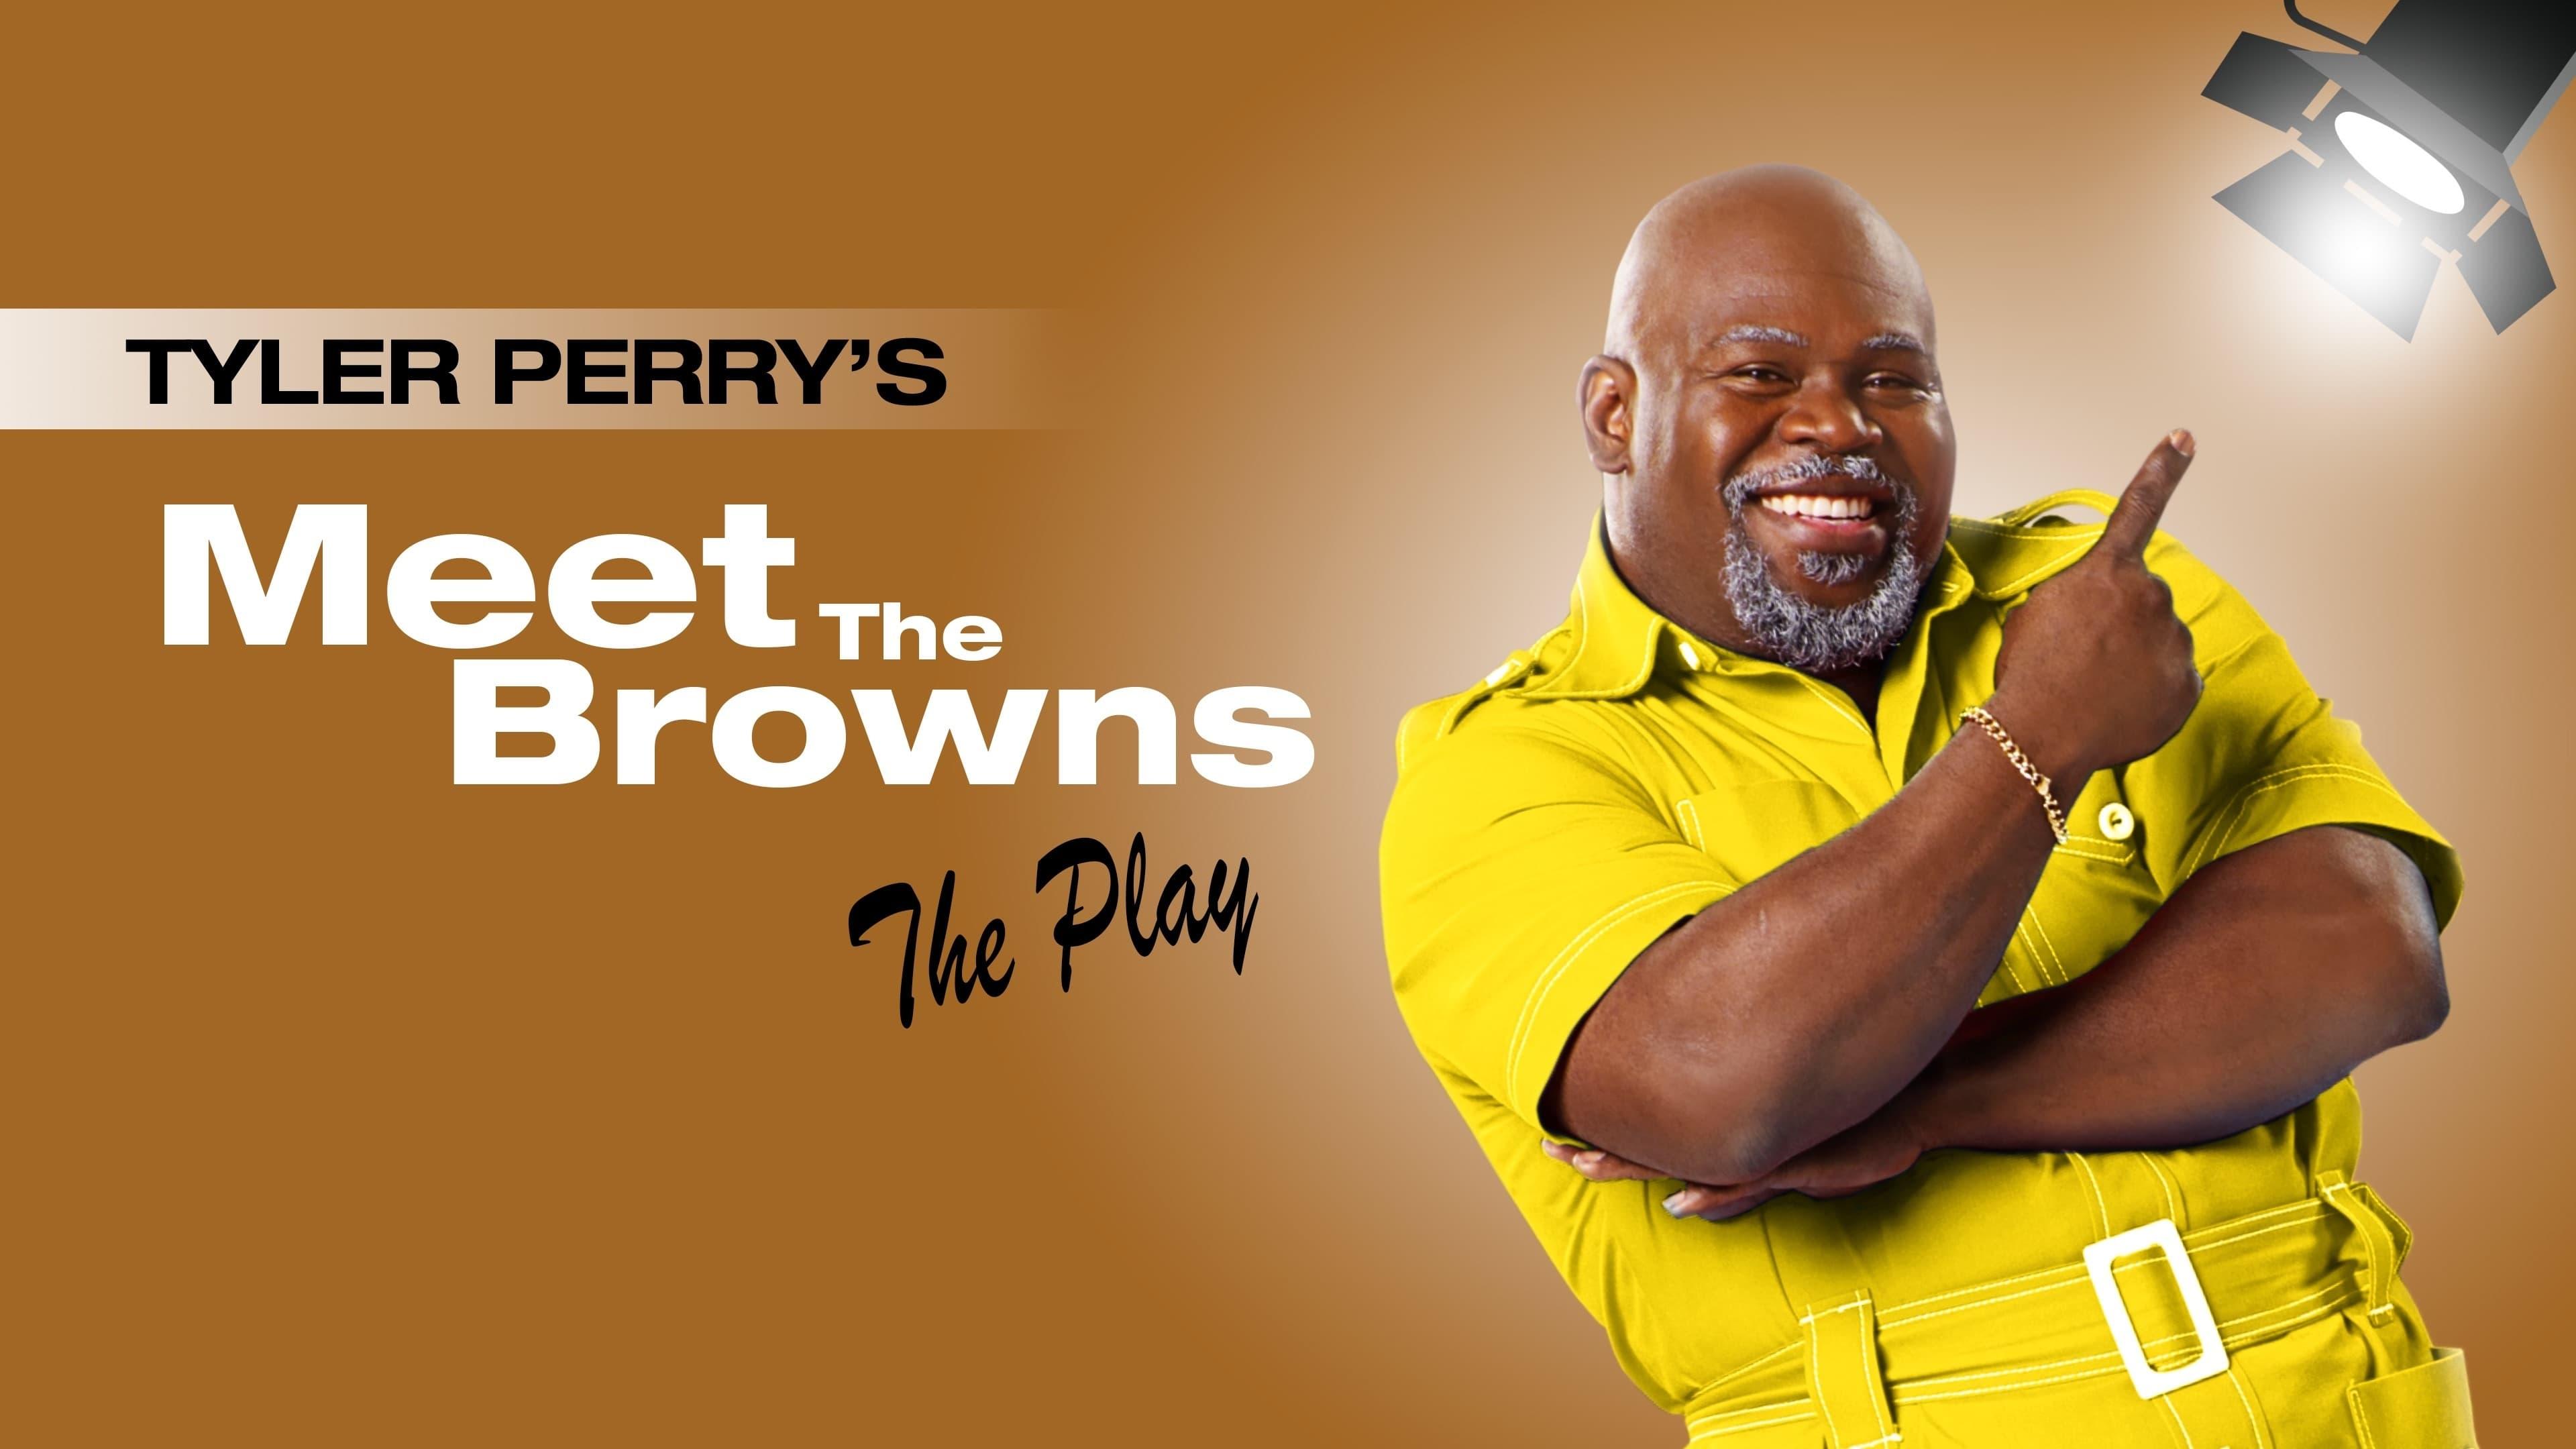 Tyler Perry's Meet The Browns - The Play backdrop